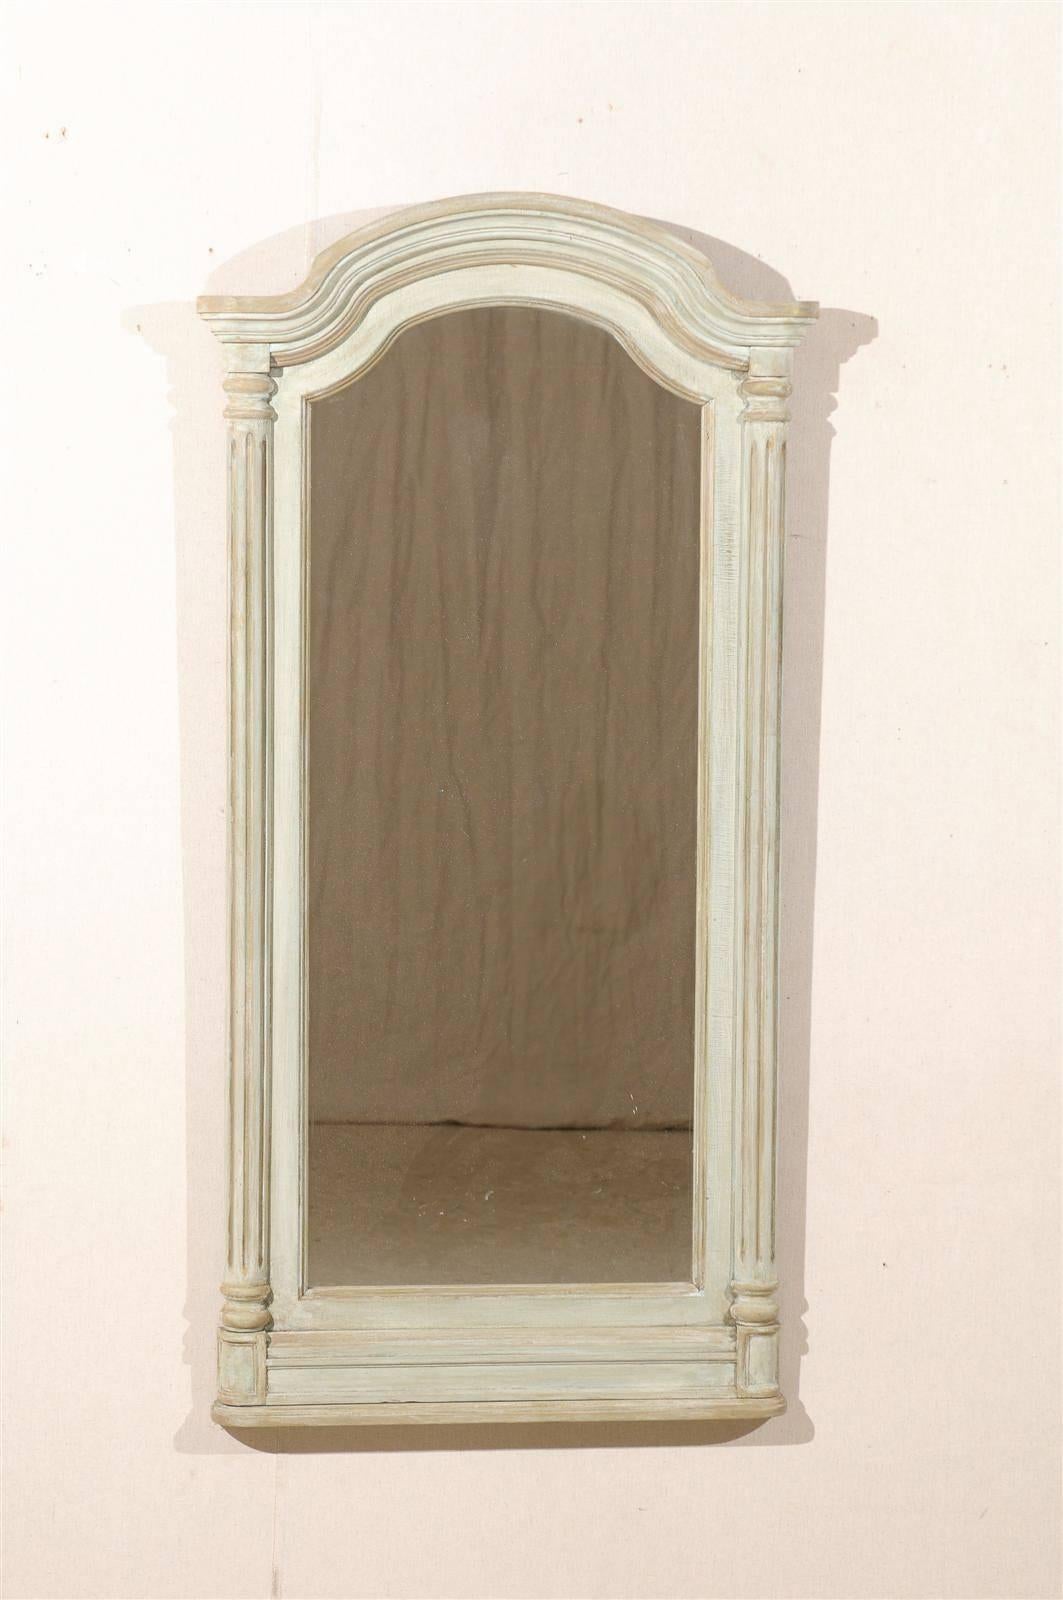 A pair of American painted wood mirrors with arched crest and fluted half columns on the sides, from the 20th century.
 